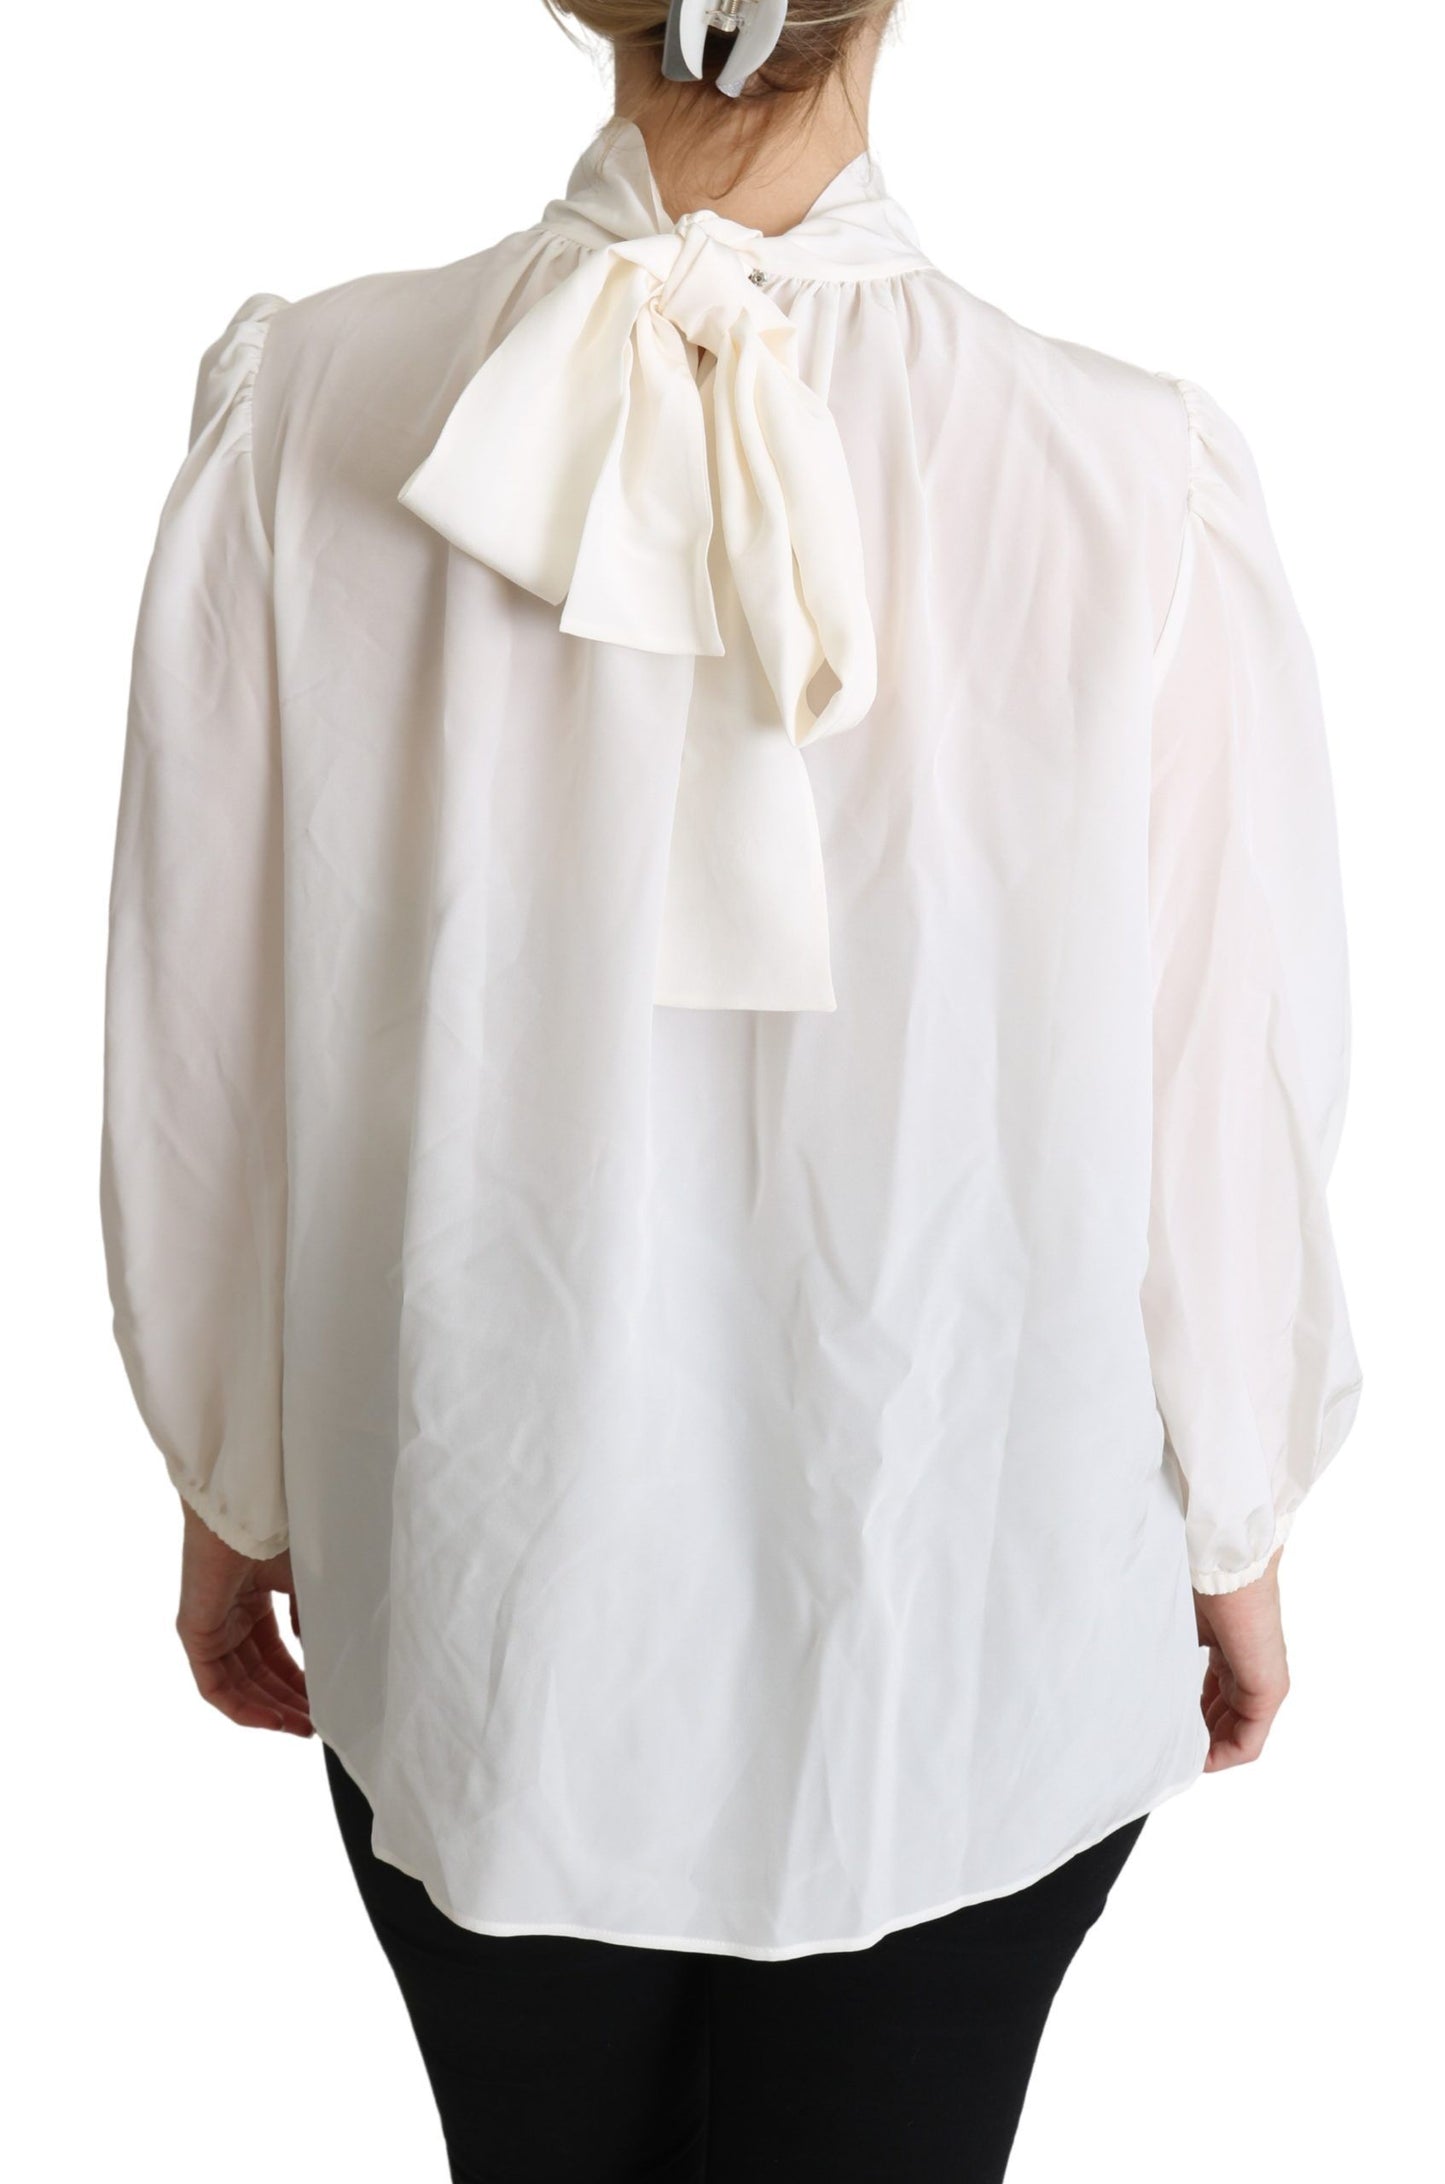 Dolce & Gabbana White Silk Pussy Bow Long Sleeved Top Blouse